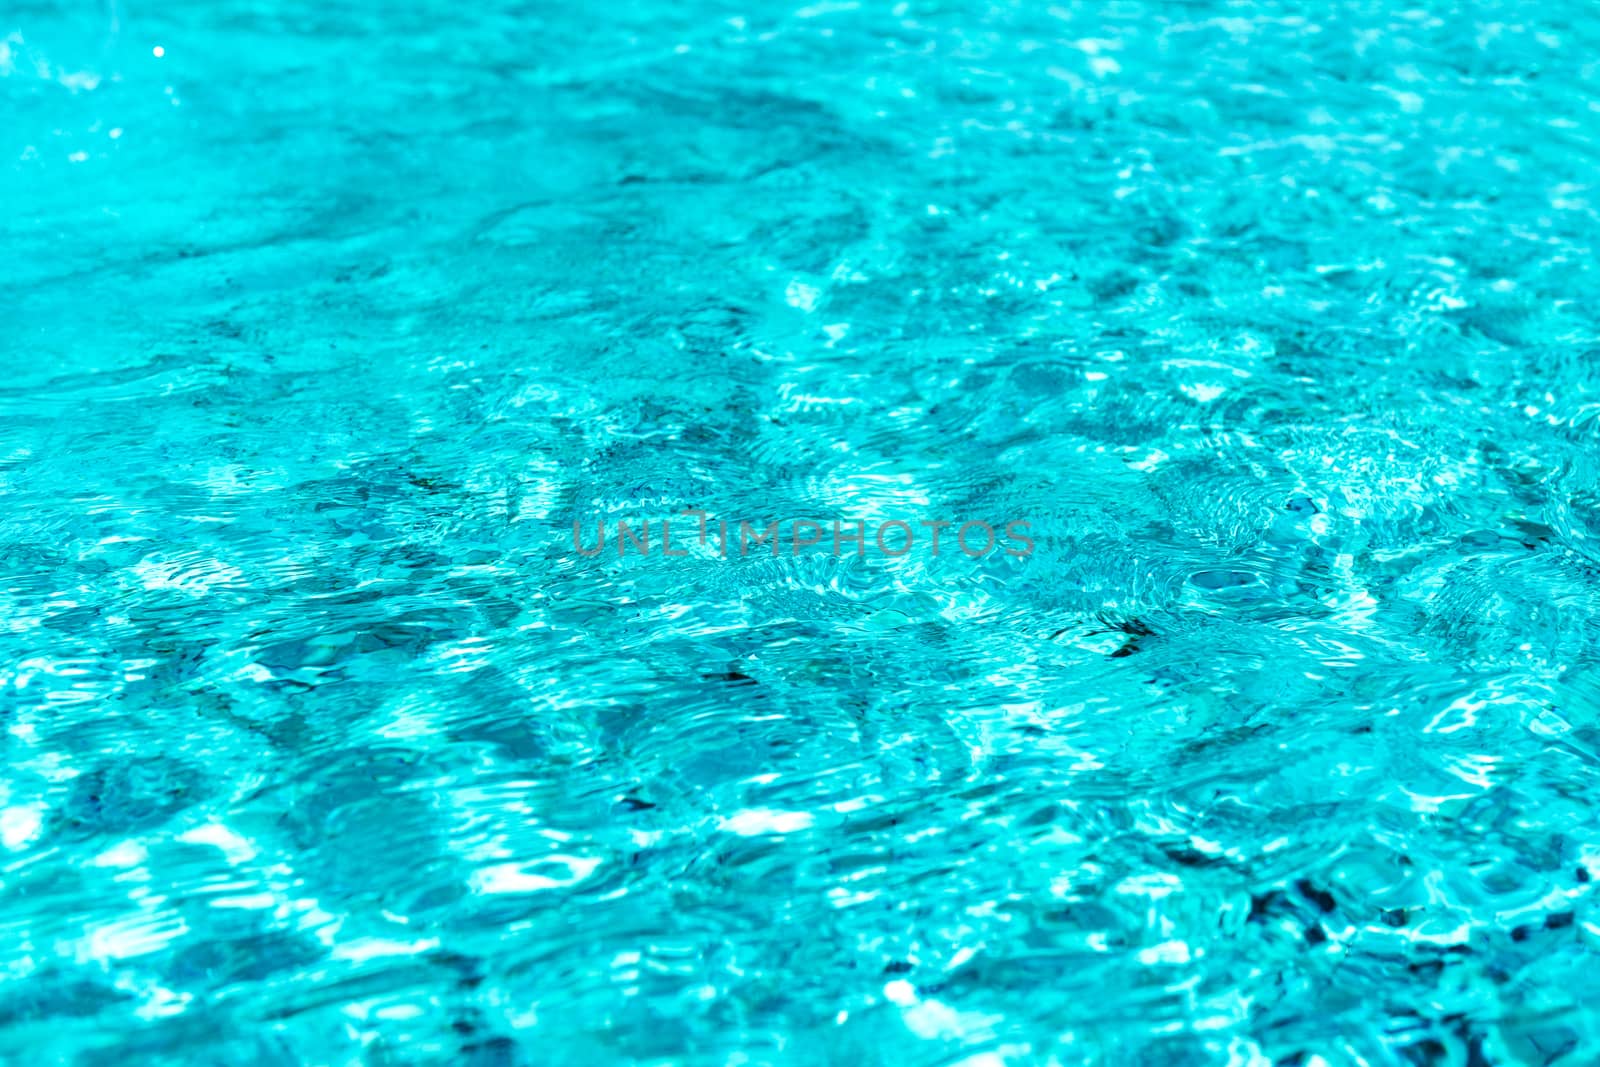 Wavy water surface by wdnet_studio